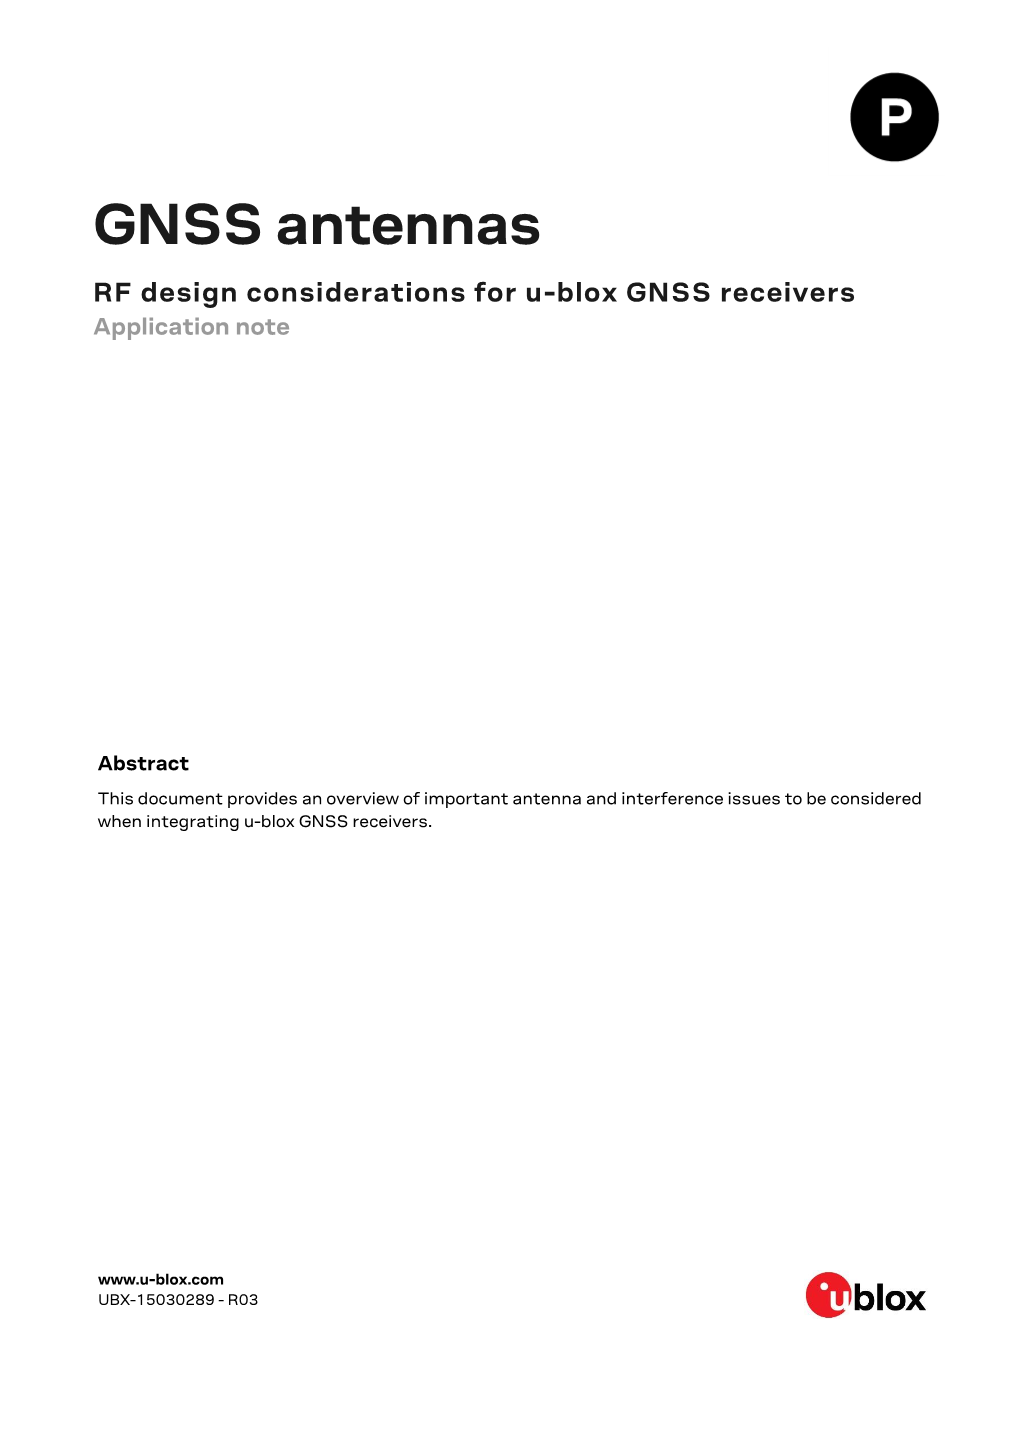 GNSS Antennas RF Design Considerations for U-Blox GNSS Receivers Application Note